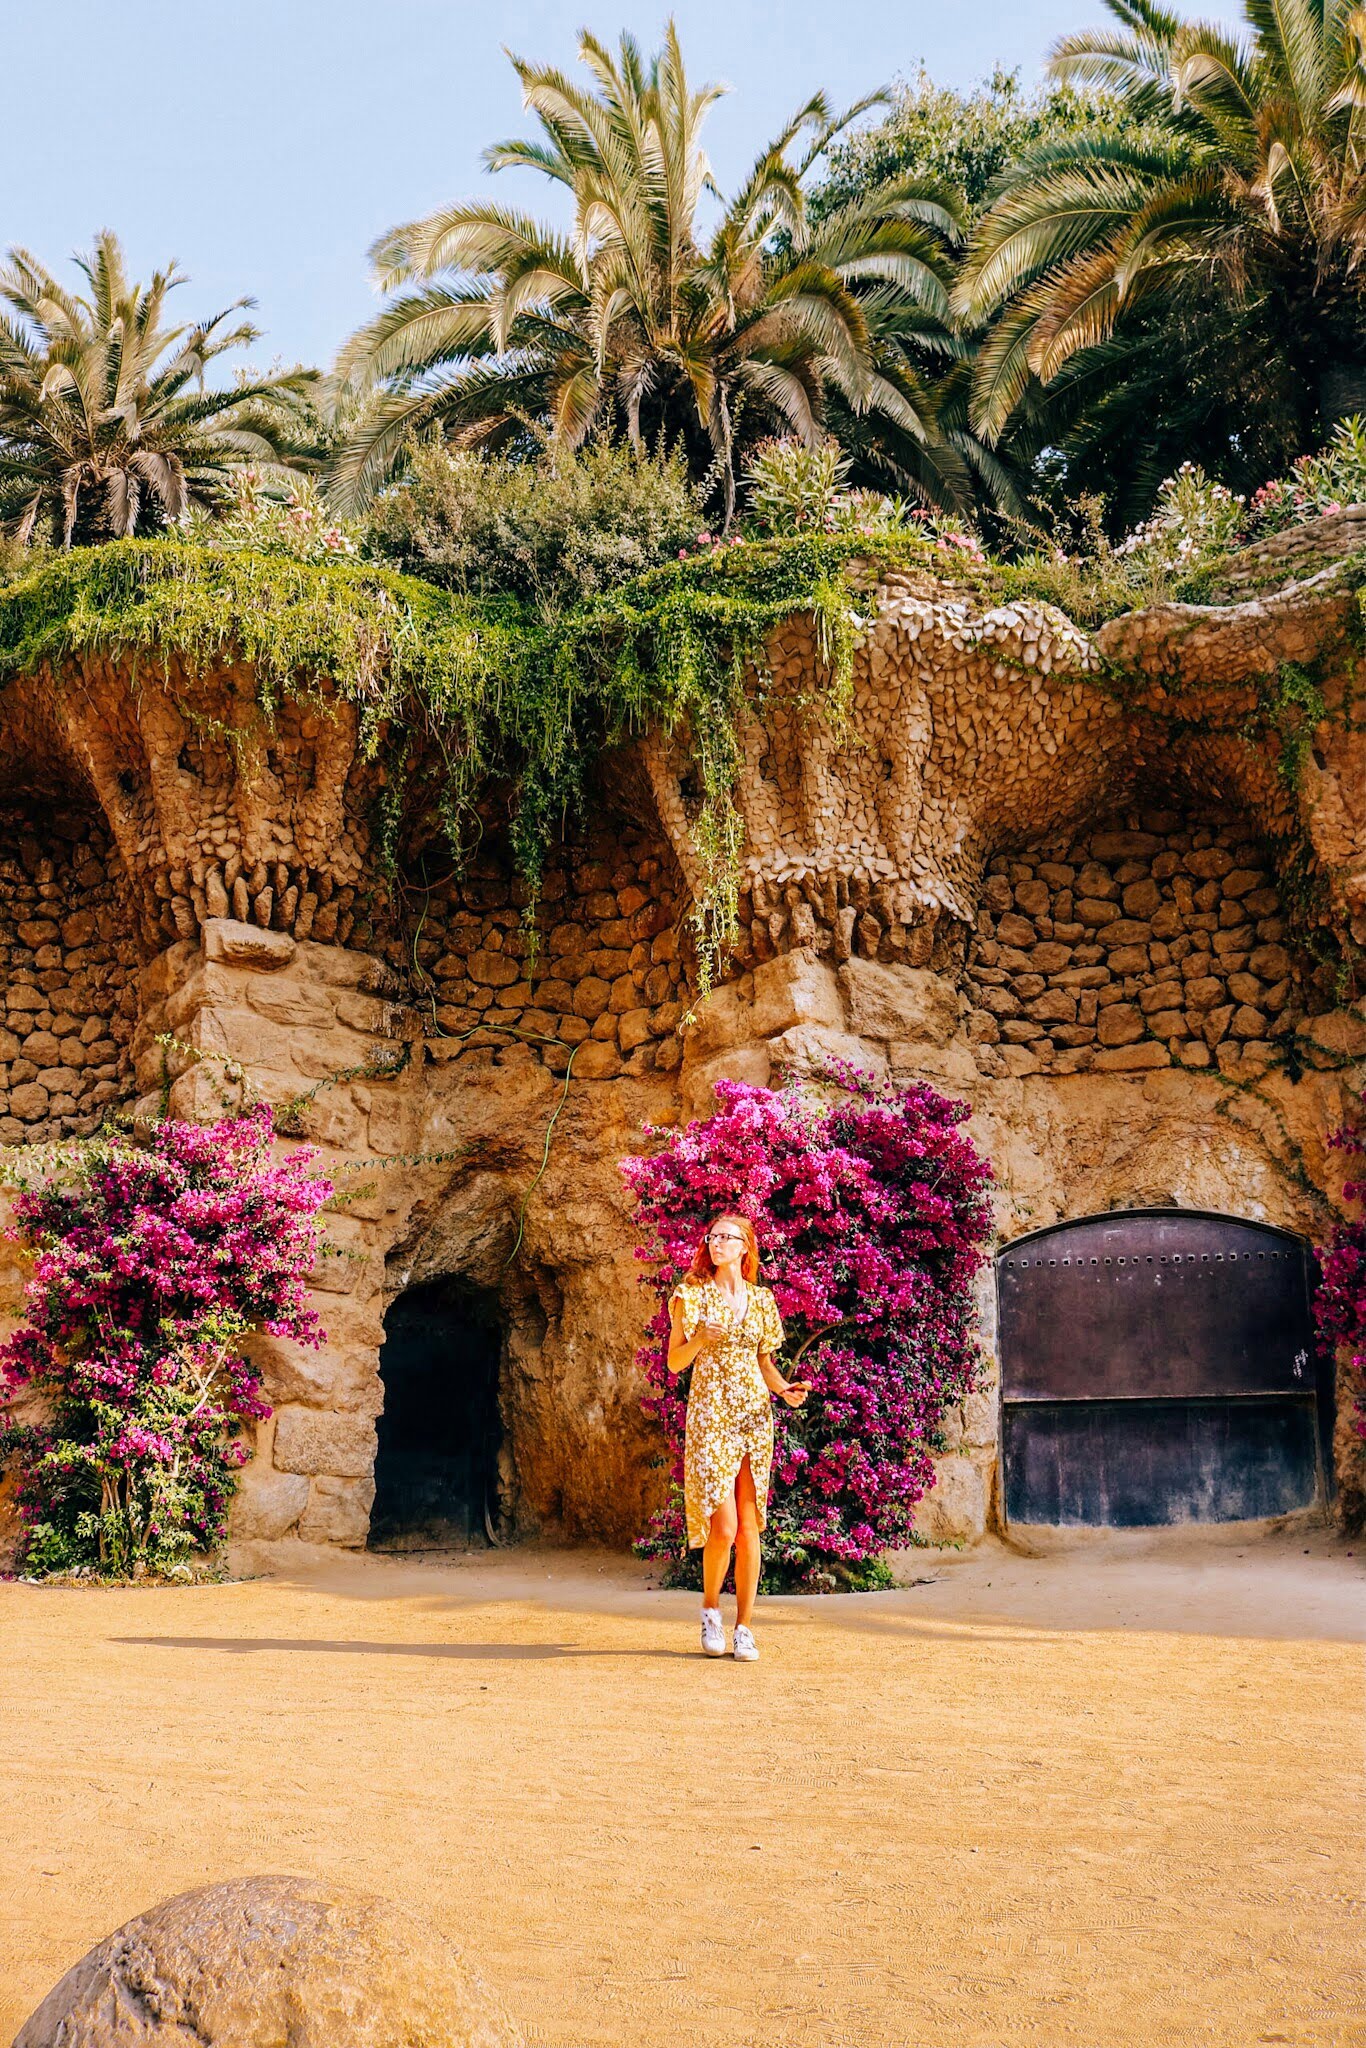 Parc Guell Barcelona